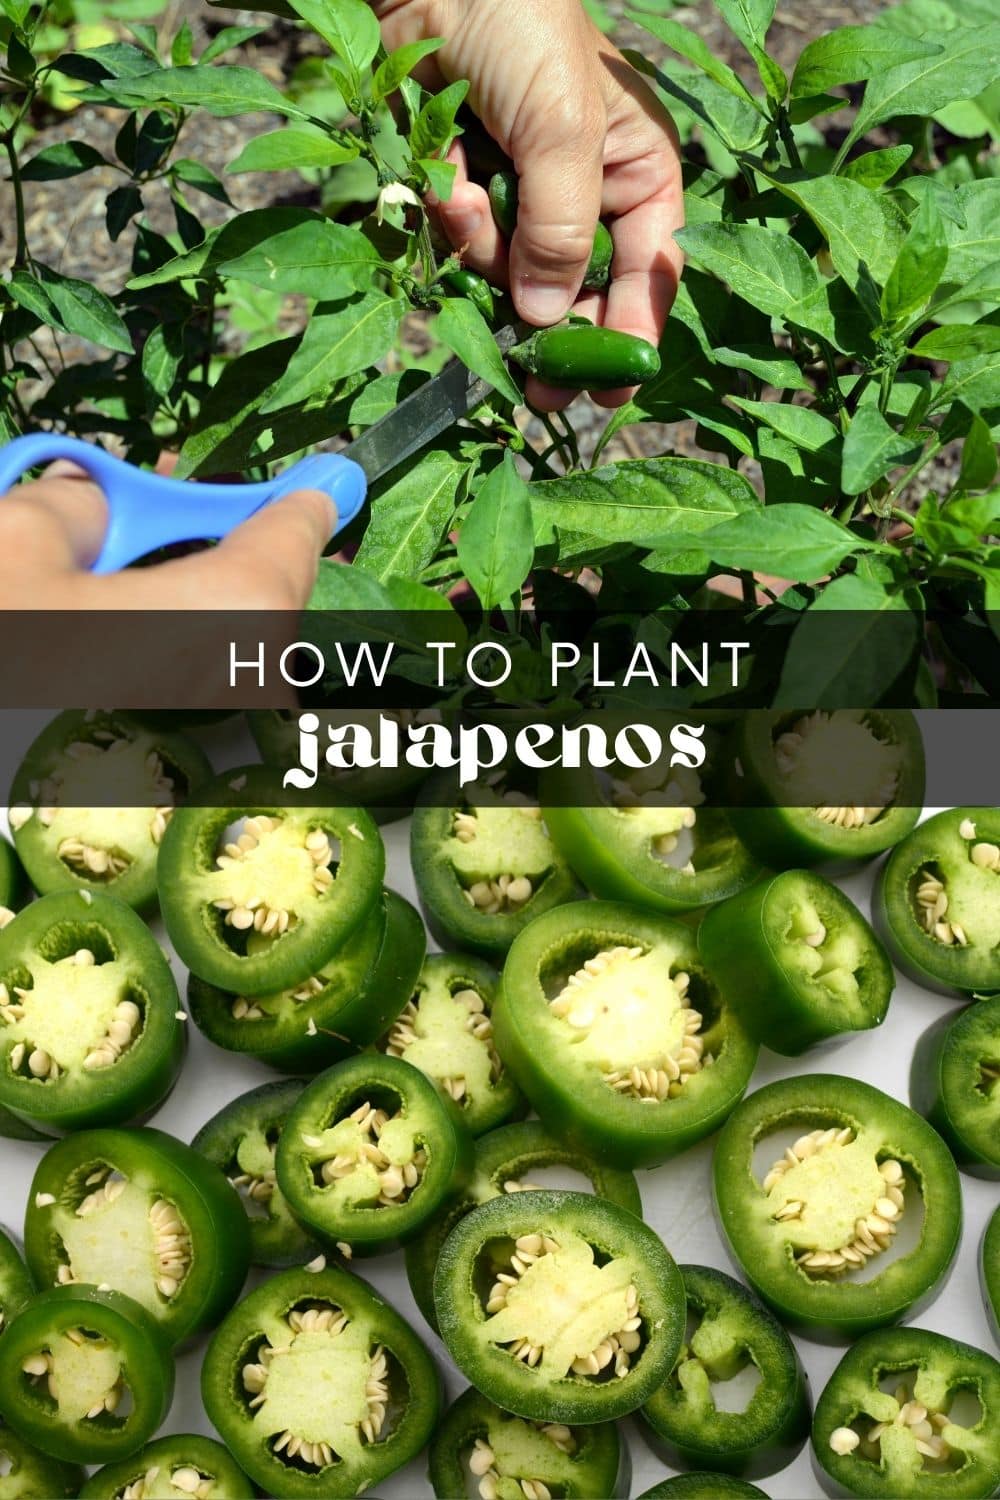 If you love a little spice, then growing jalapenos in your garden is a must! These delicious peppers are easy to grow in the right conditions and are a great addition to any dish. So don't waste any more money buying them at the store. Grow jalapenos yourself and enjoy them fresh from your own garden!